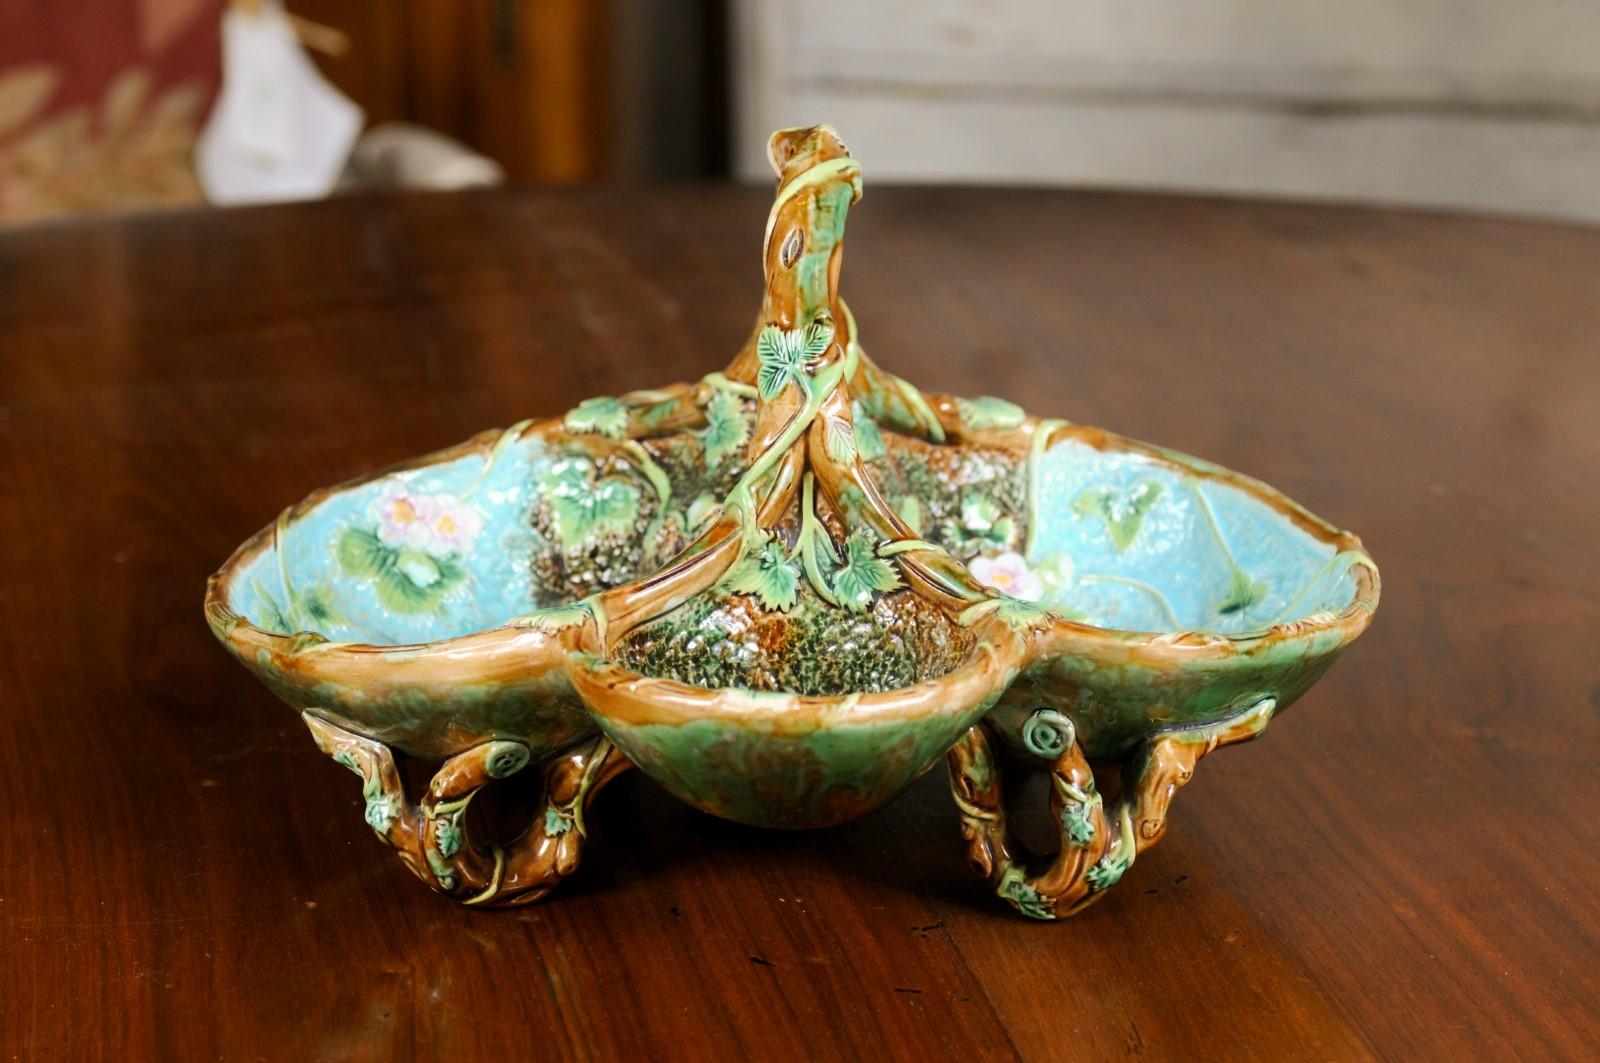 Glazed 19th Century George Jones Four-Part Majolica Porcelain Serving Bowl with Daisies For Sale